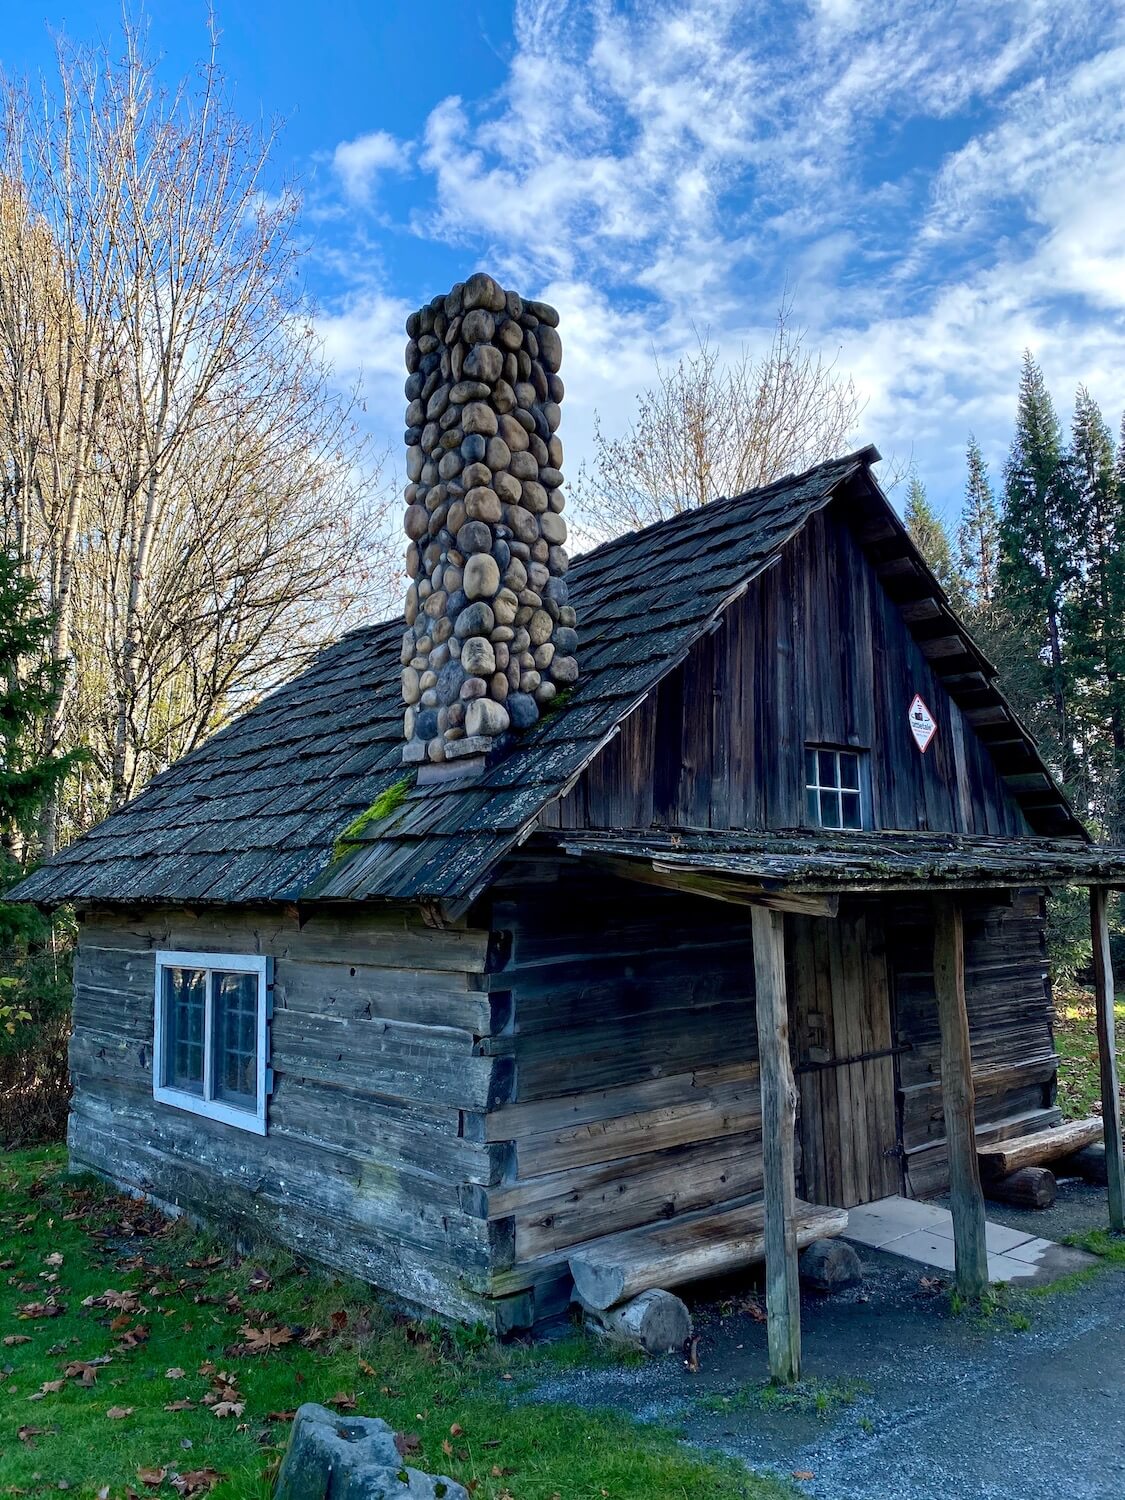 The Barker Cabin at the entrance to West Hylebos Wetlands Park is the oldest building in Federal Way, Washington. The structure is built by wood plants woven together with a wood shake roof and round stones piled up to create a chimney. There is a primitive front porch with two log seats.